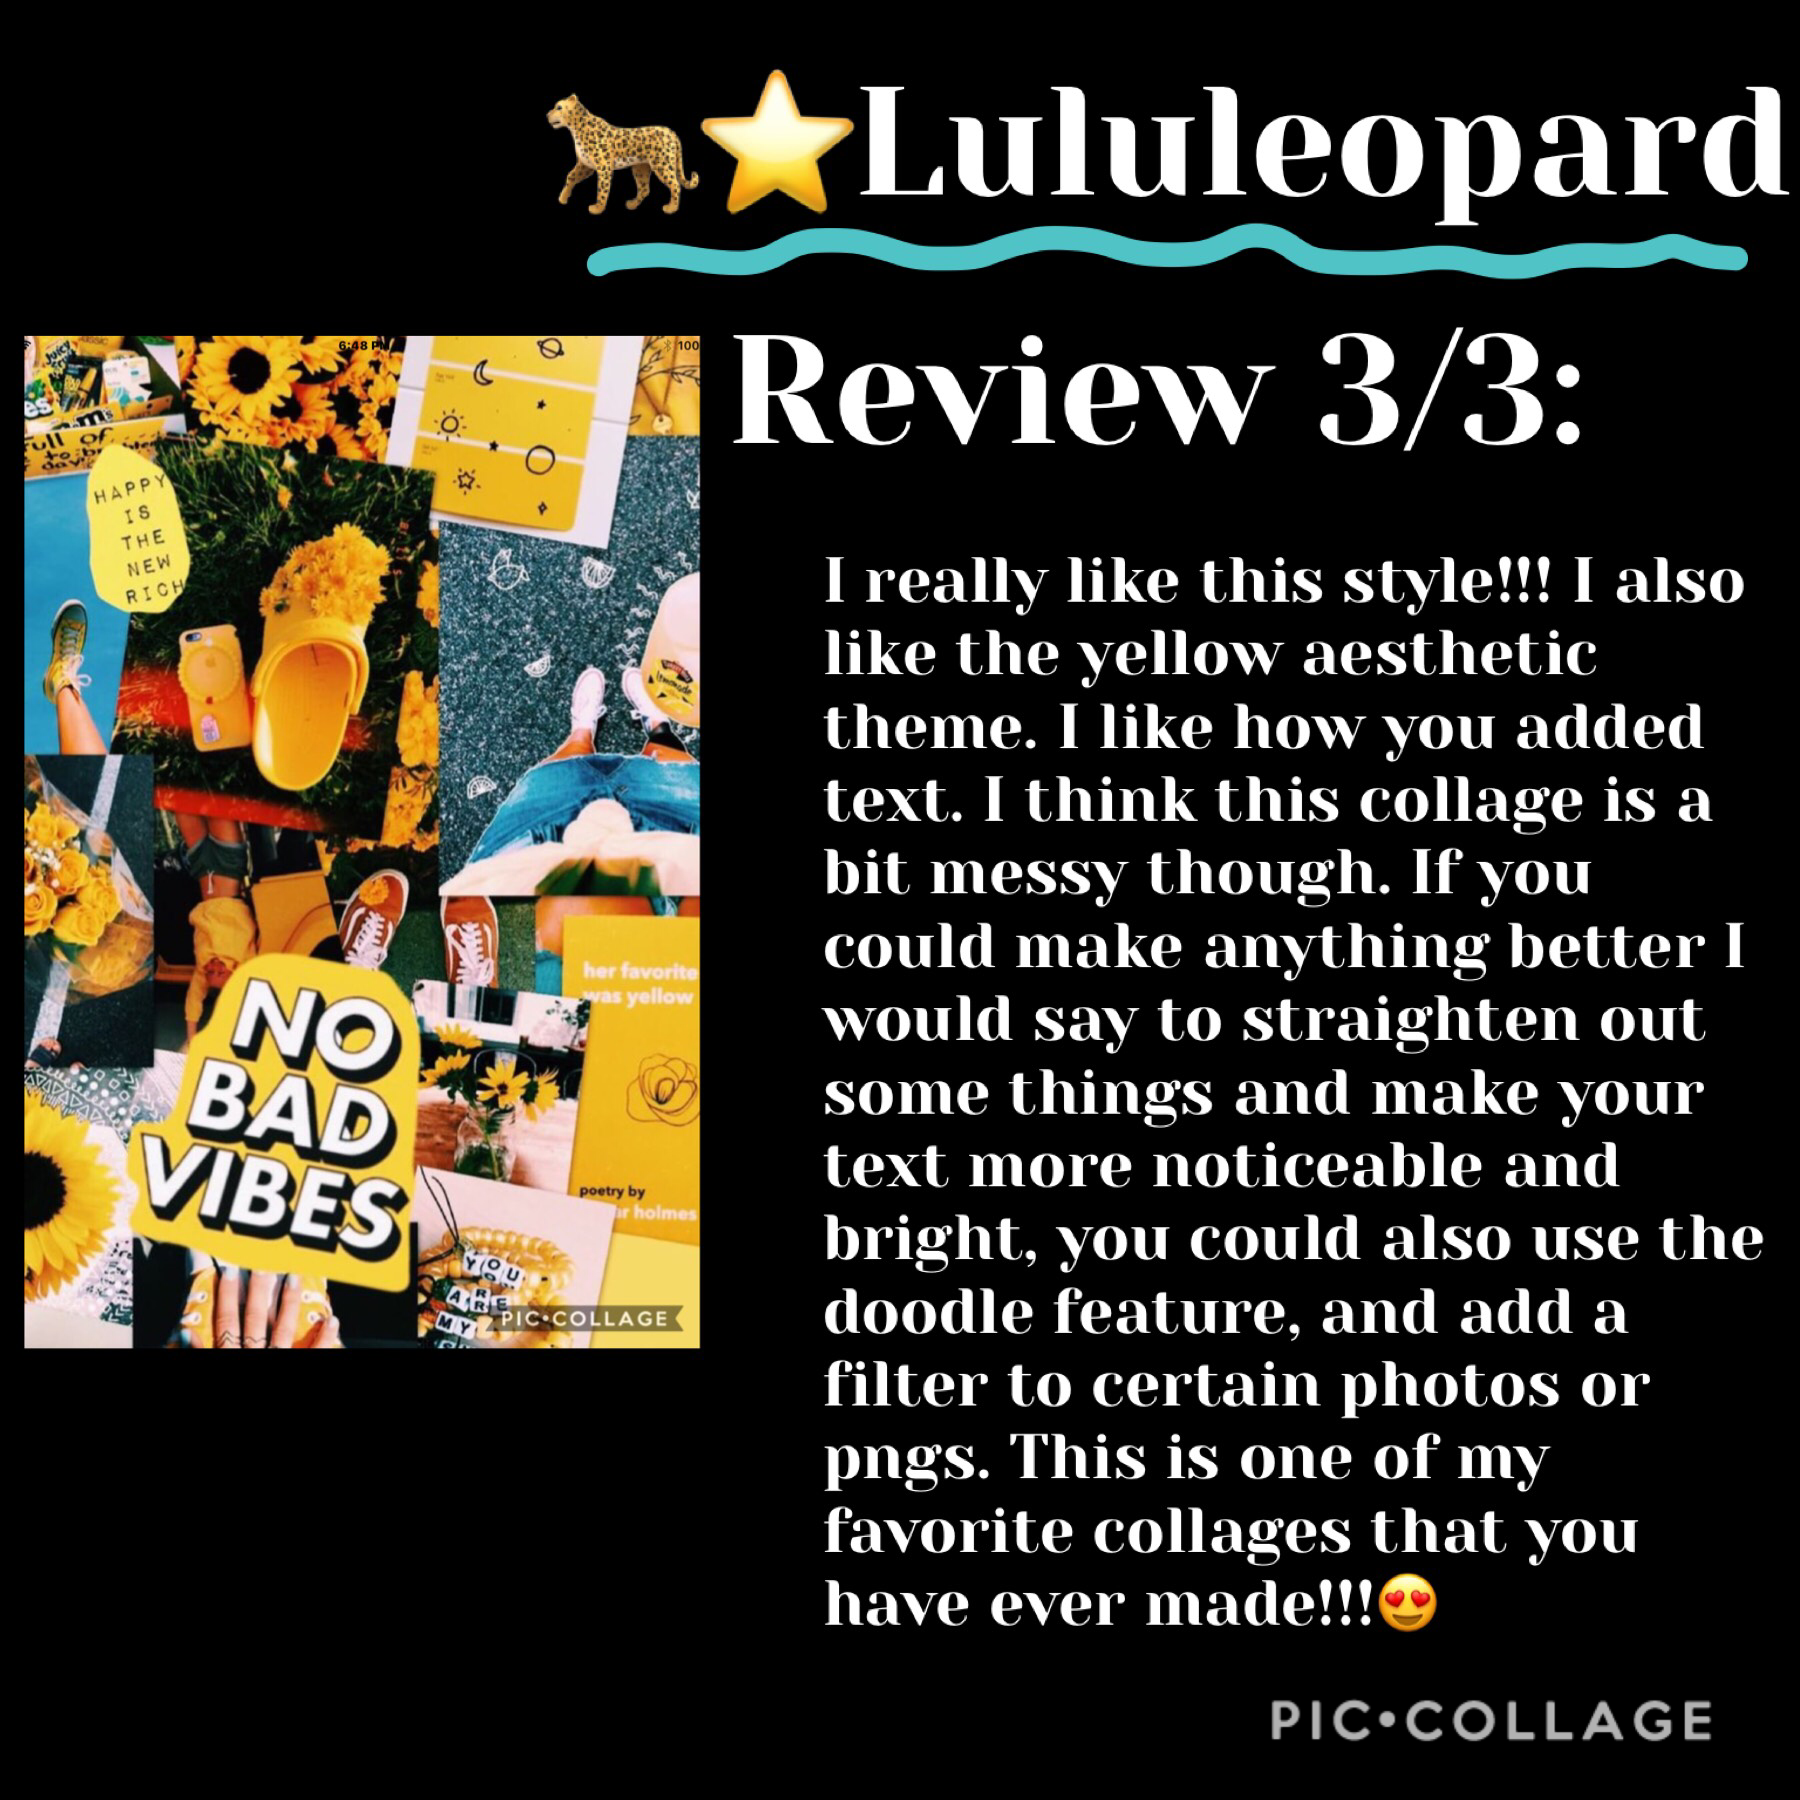 🐆TAP🐆
Review 3/3 for Lululeopard 
Please fill out my review sheet to request a review!! 
Rating 8.5/10
Im sorry If im being rude but your such a great collager!! 
PS go follow @Lululeopard 🐆⭐️🐆⭐️